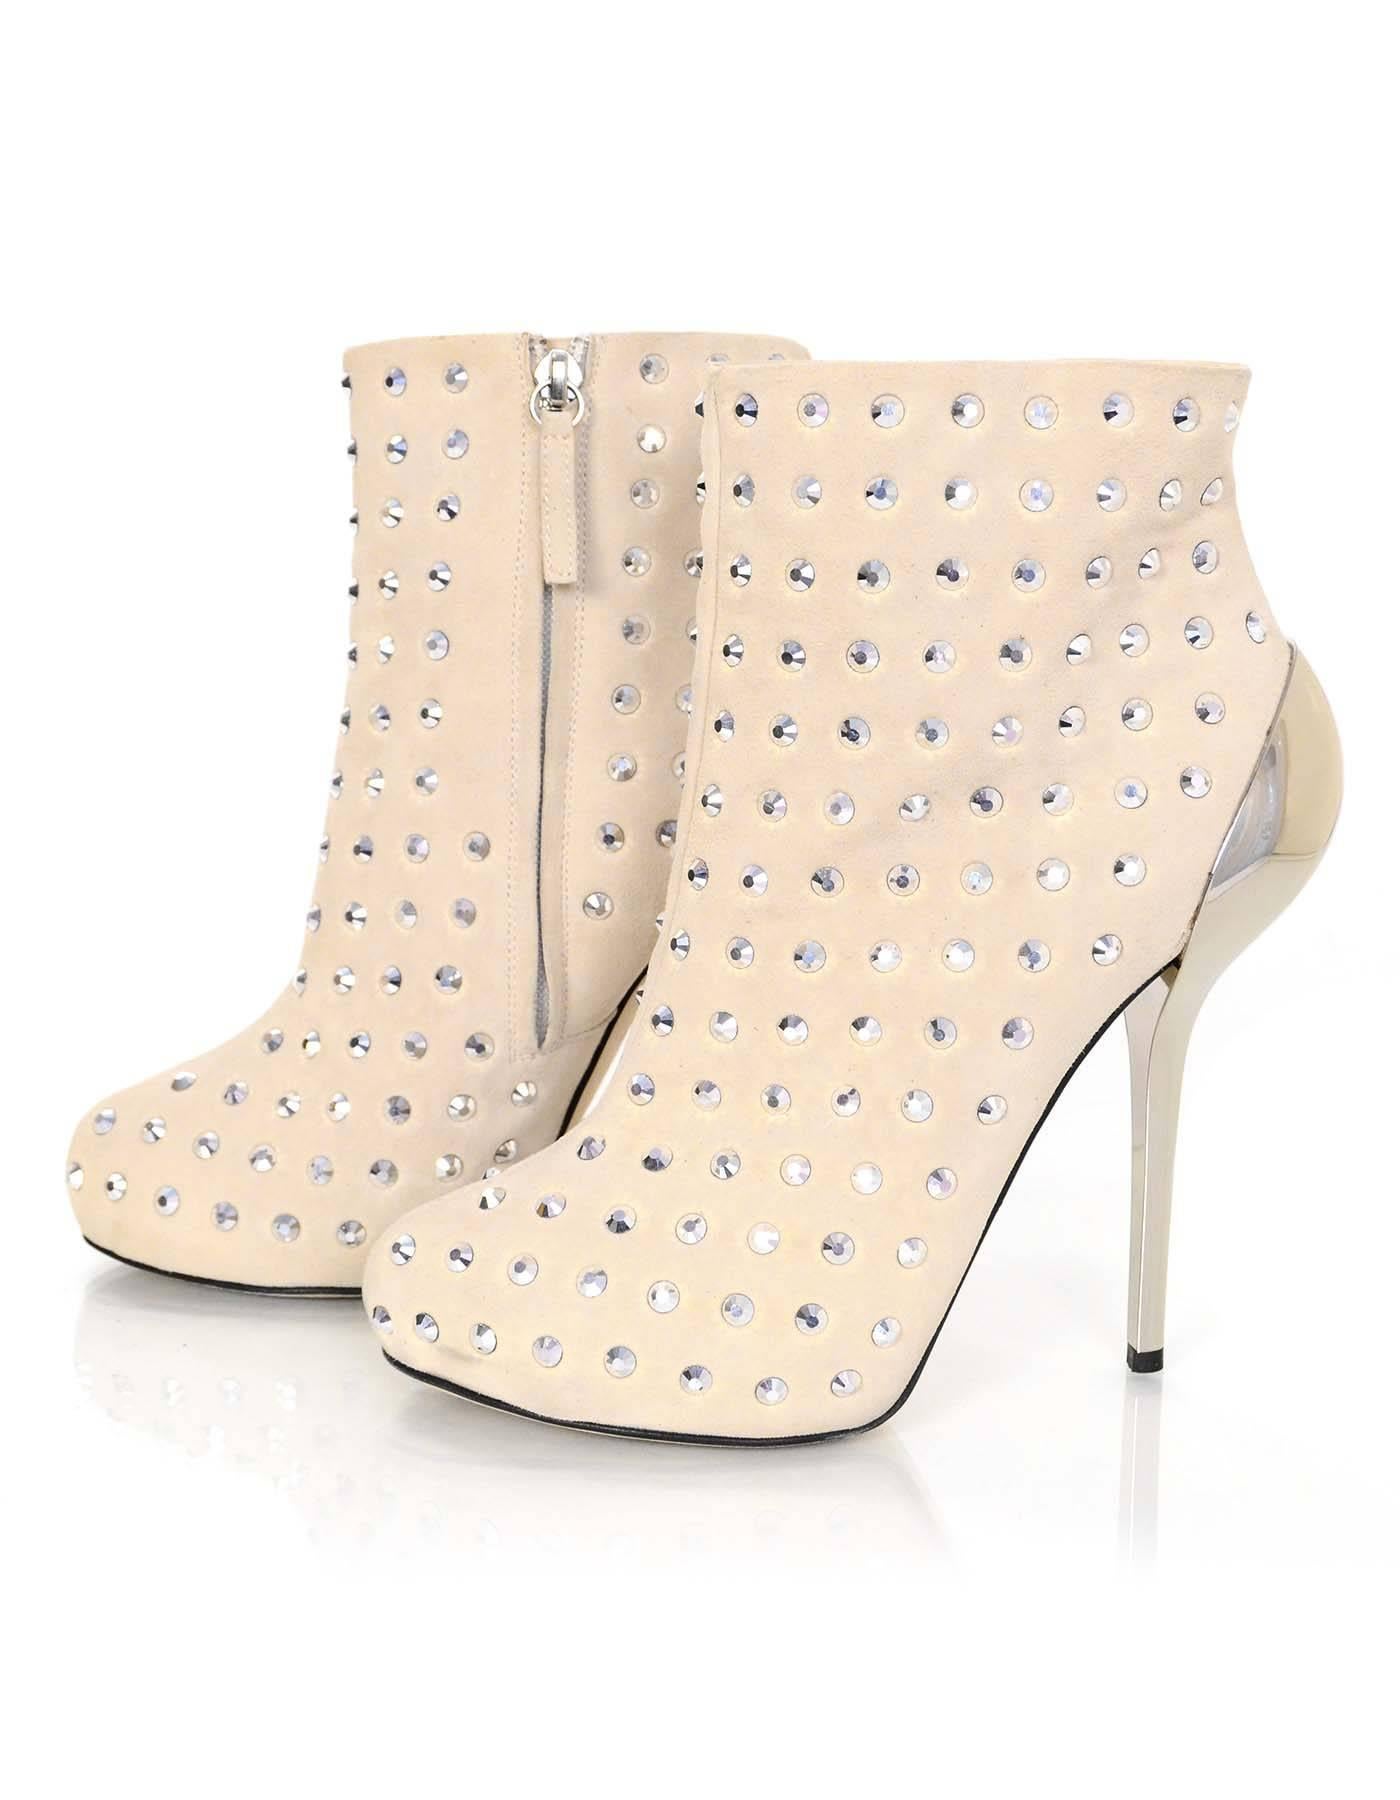 Giuseppe Zanotti Beige Studded Suede Ankle Boots Sz 38

Features silvertone studding throughout and chrome heels

Made In: Italy
Color: Beige, silver
Materials: Suede, metal
Closure/Opening: Side zip closure
Sole Stamp: Vero cuoio made in